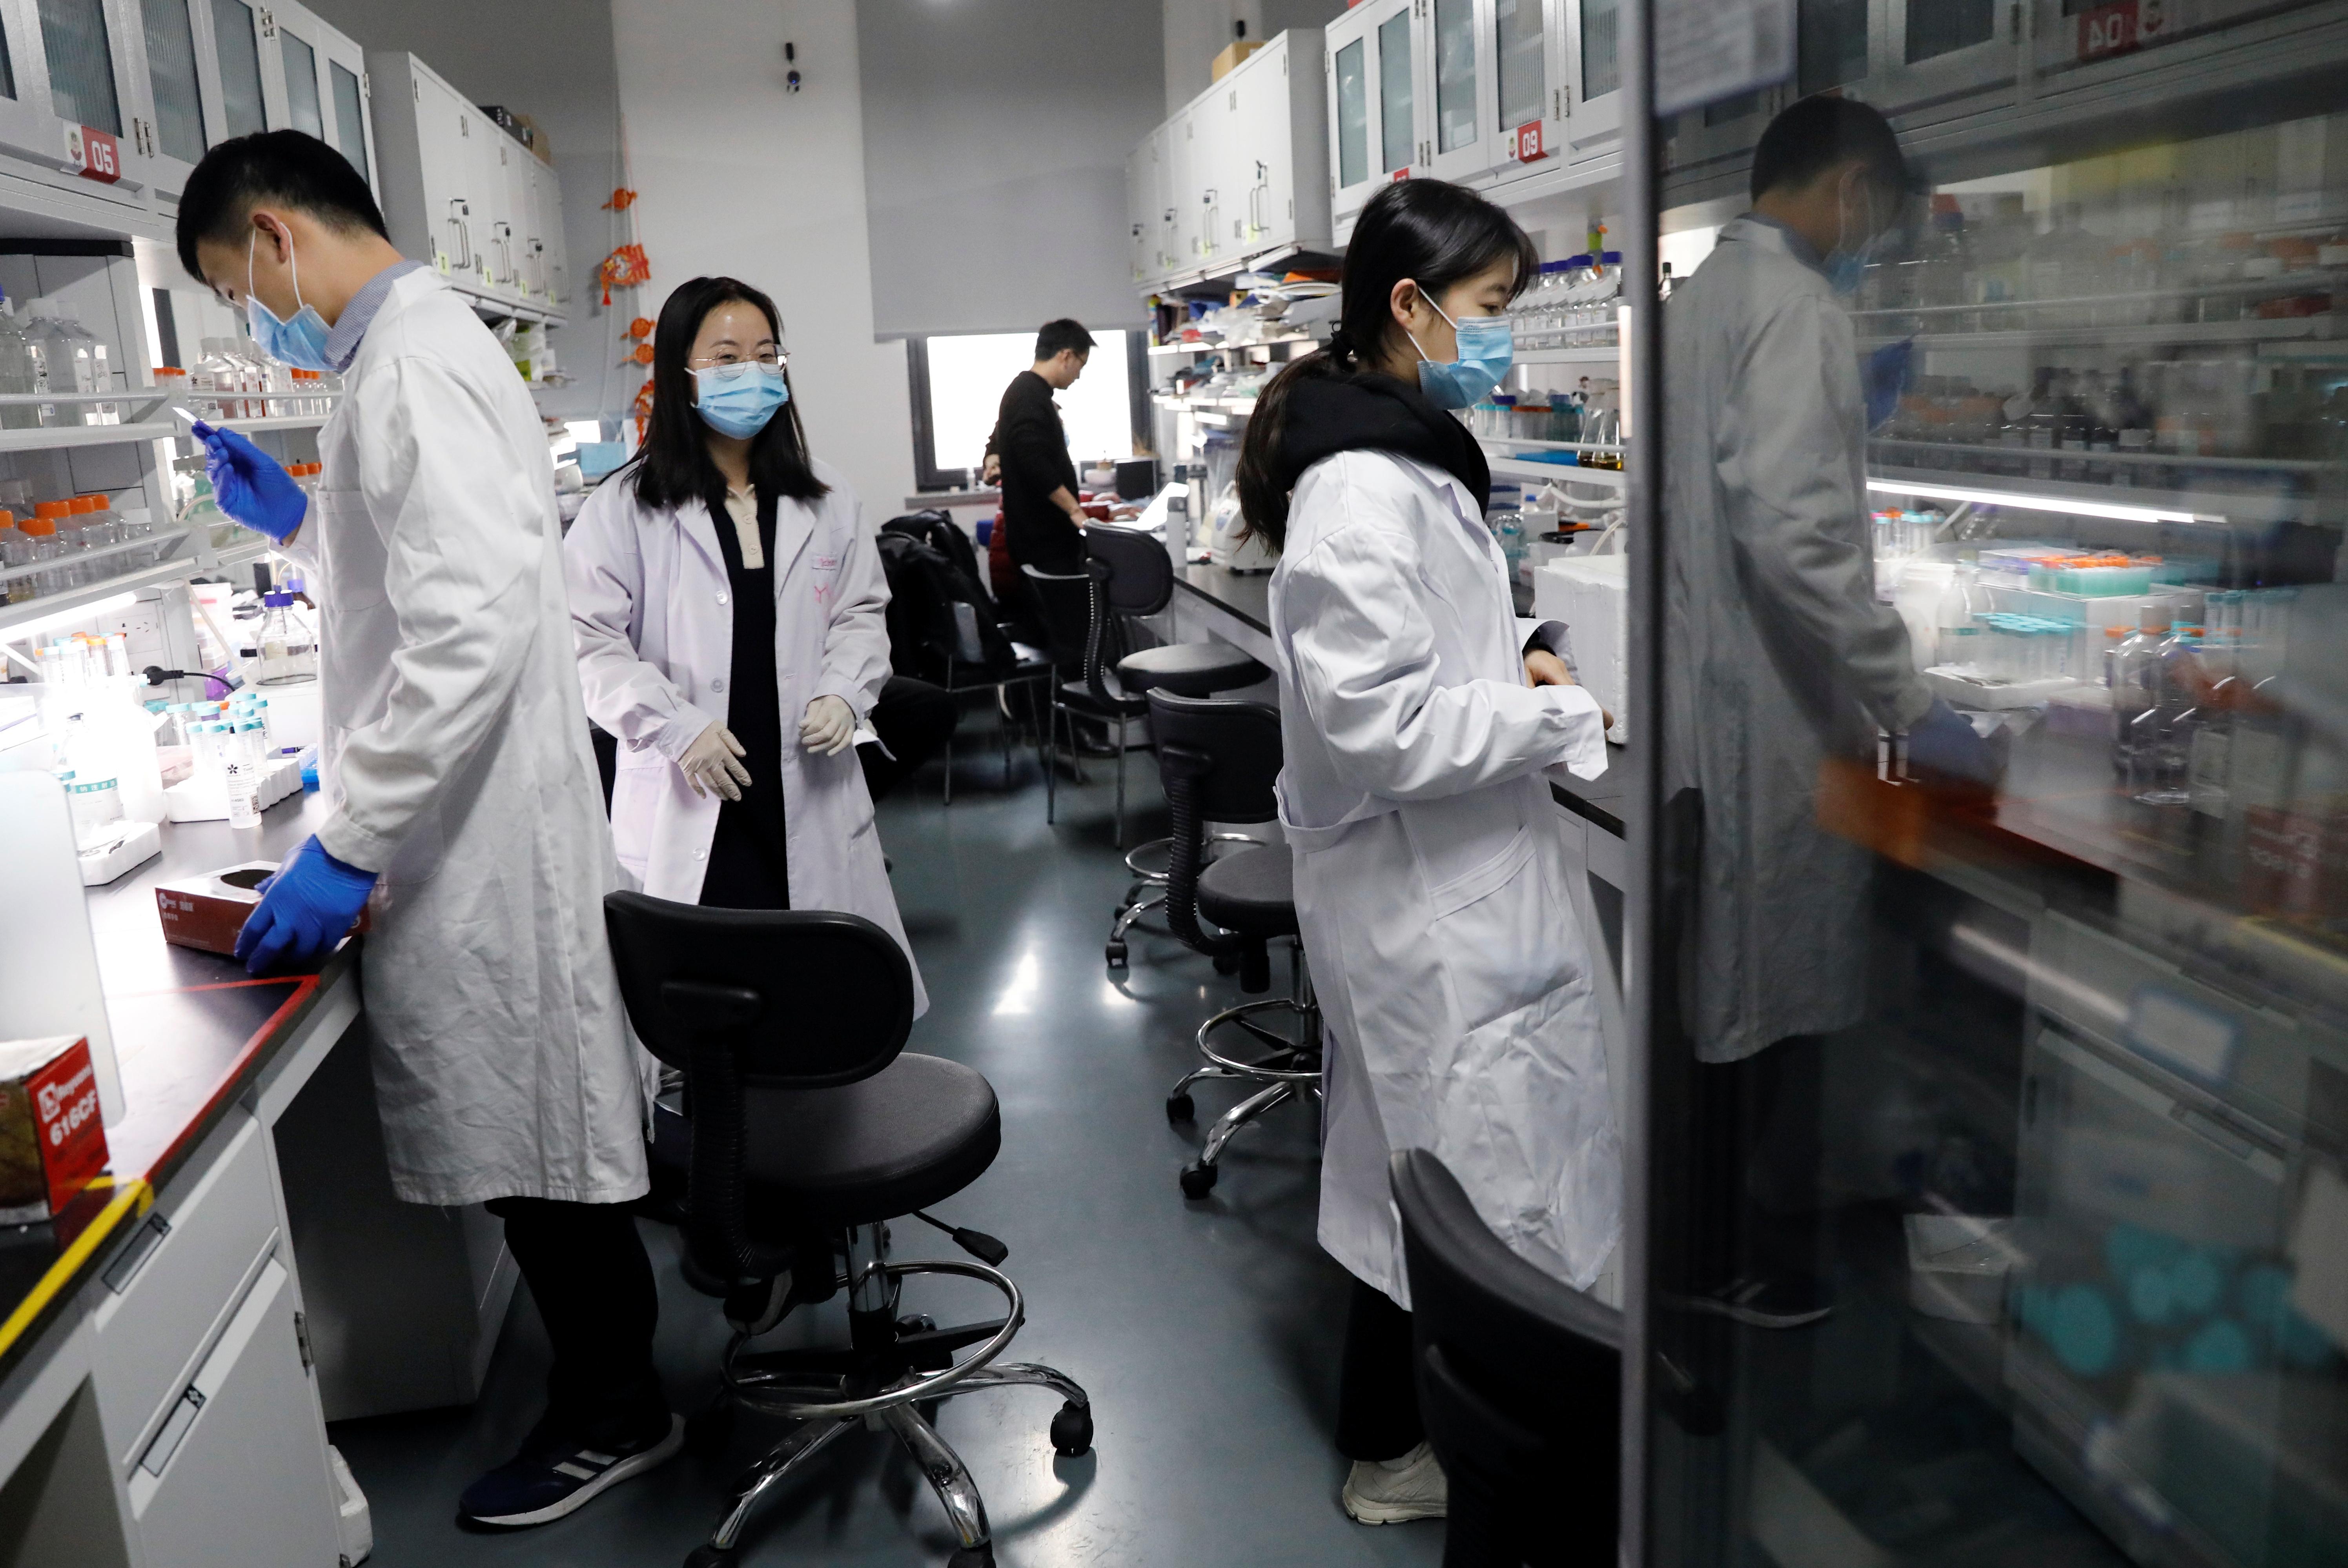 Researchers work in the Aging and Regeneration lab at the Institute for Stem Cell and Regeneration of the Chinese Academy of Sciences (CAS) in Beijing, China, January 12, 2021. Picture taken January 12, 2021. REUTERS/Tingshu Wang